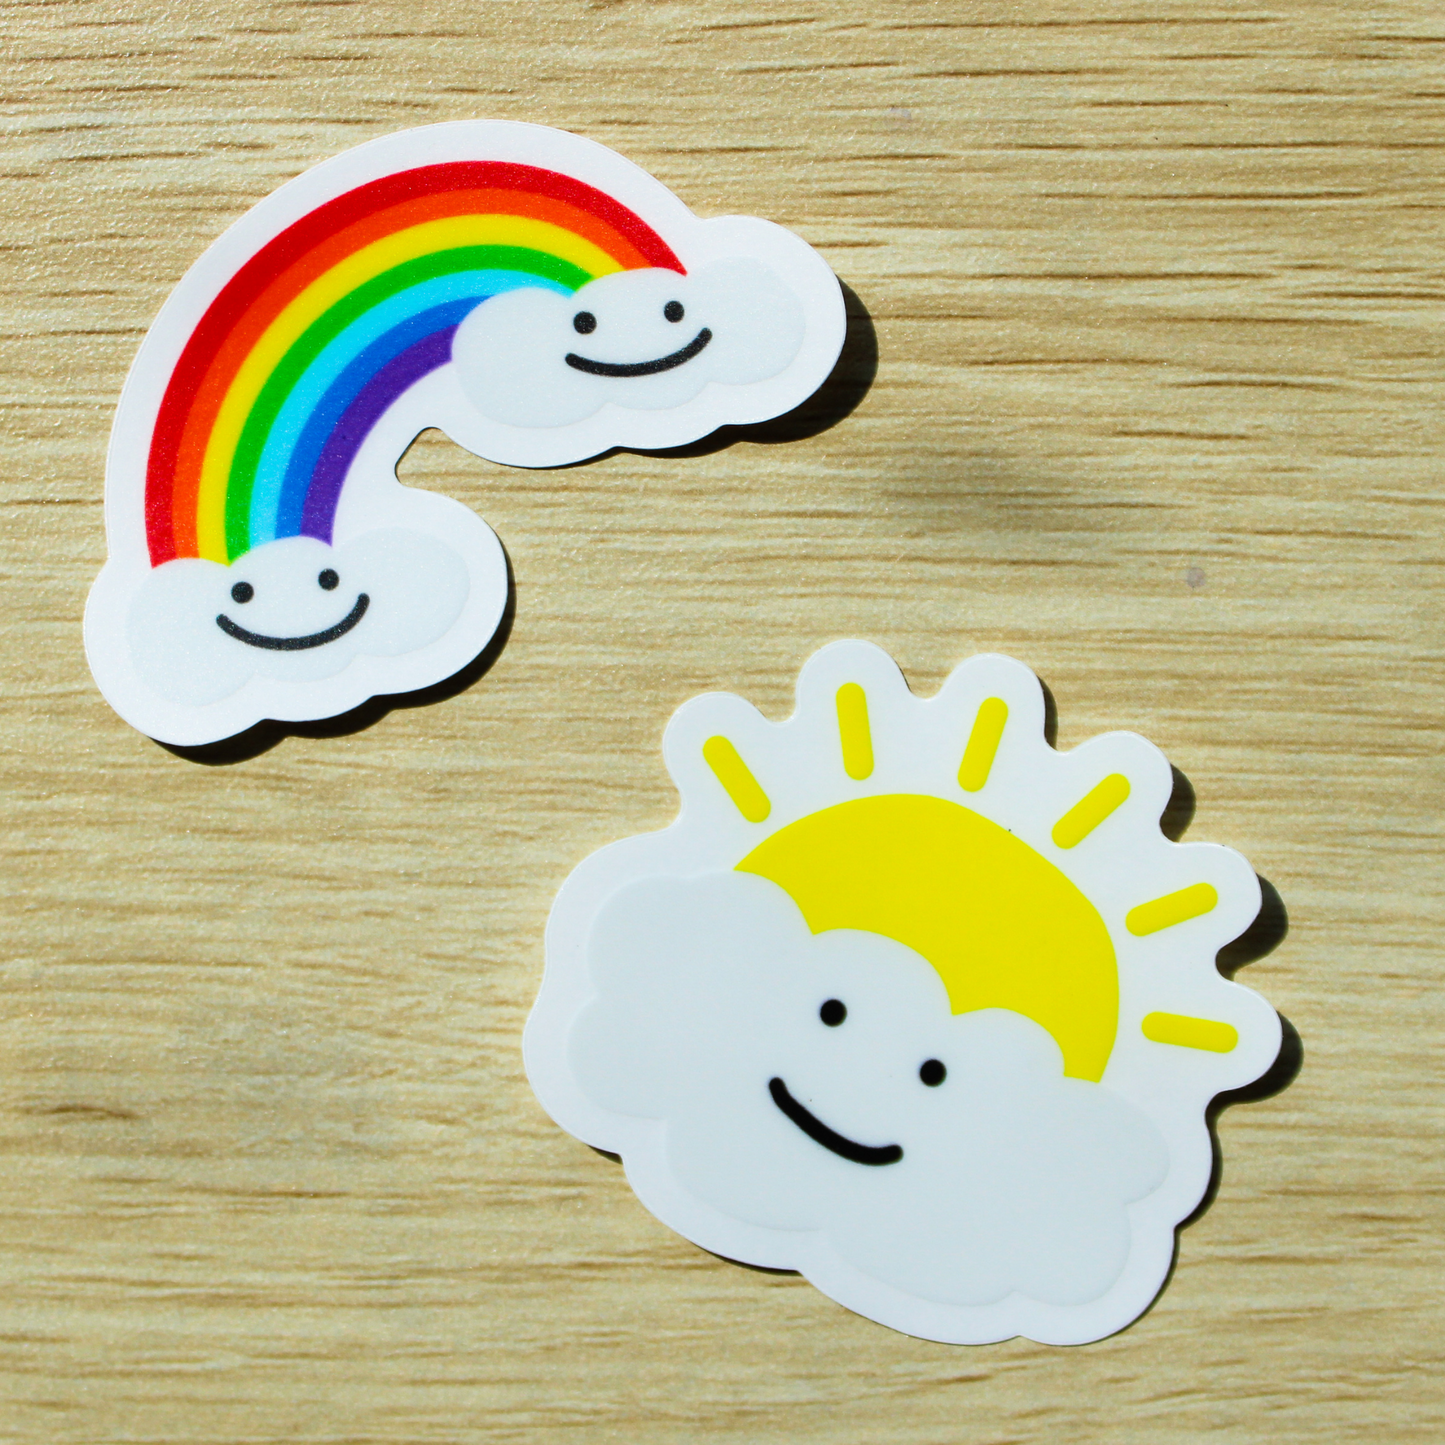 A wooden background with a happy rainbow cloud and a happy sun cloud on top.